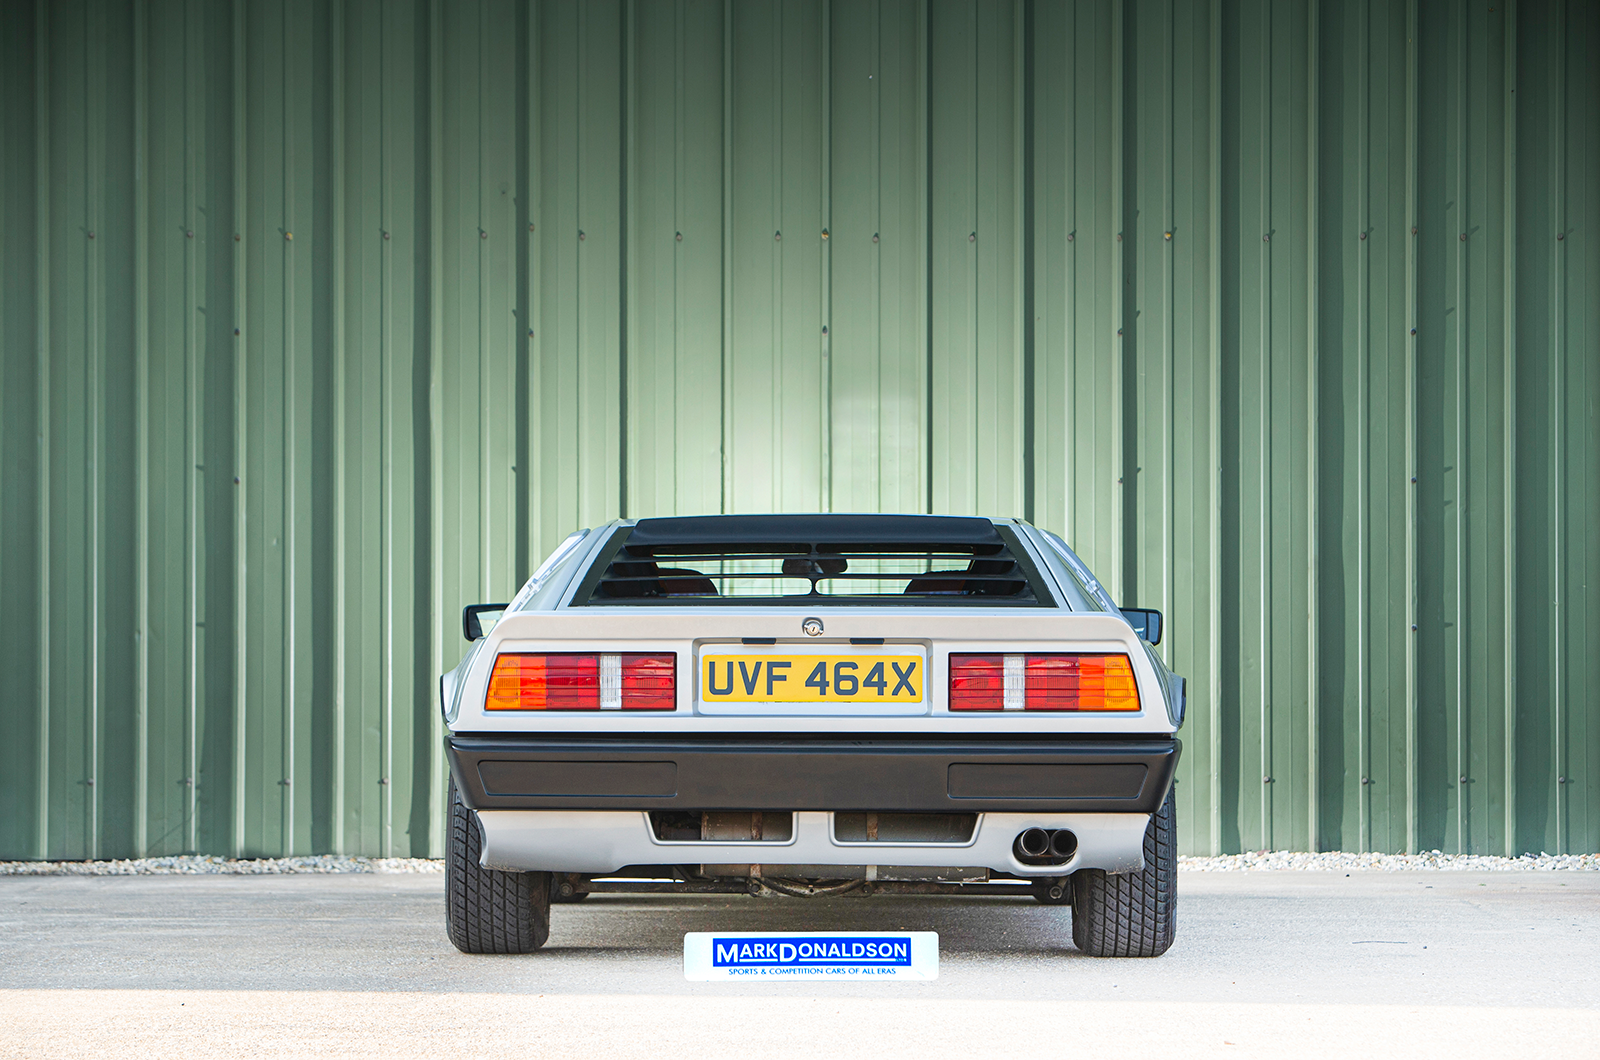 Classic & Sports Car – Want to own Colin Chapman’s Lotus Esprit?